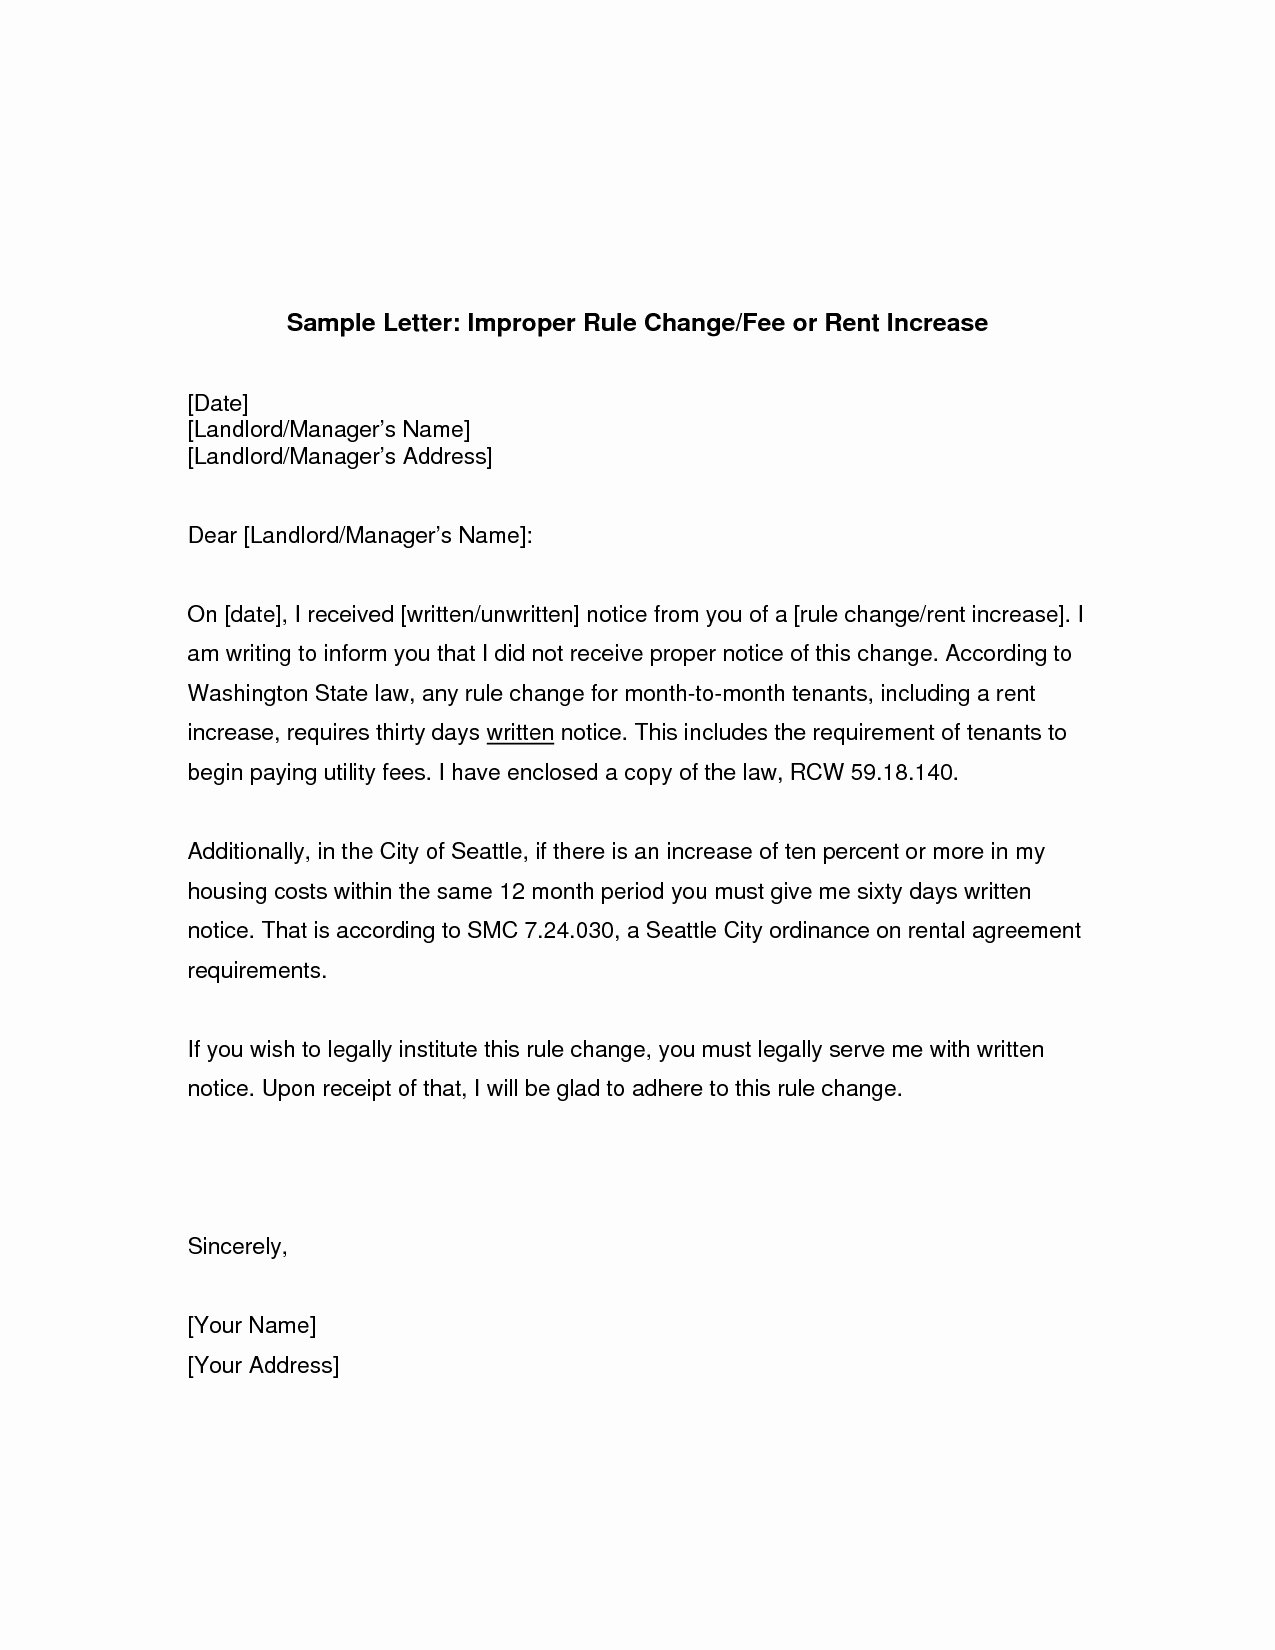 Sample Letter to Tenant Elegant Change Ownership Letter to Tenants Template Examples